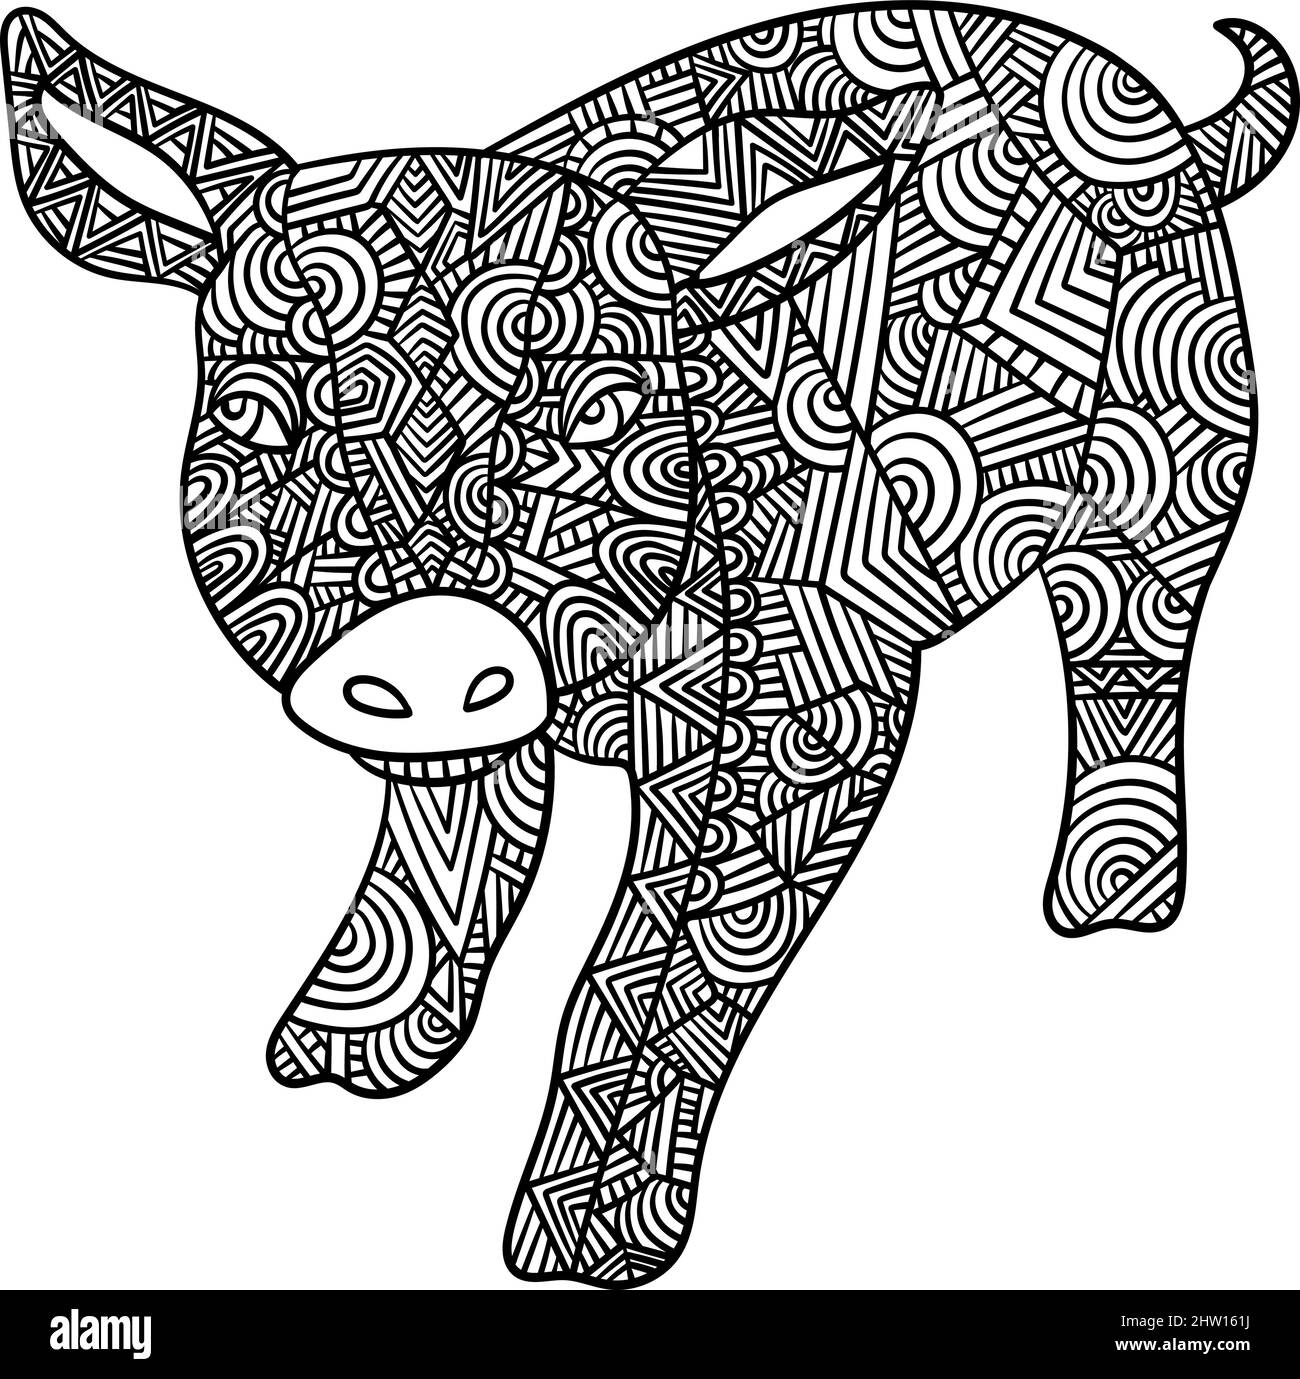 Pig Mandala Coloring Pages for Adults Stock Vector